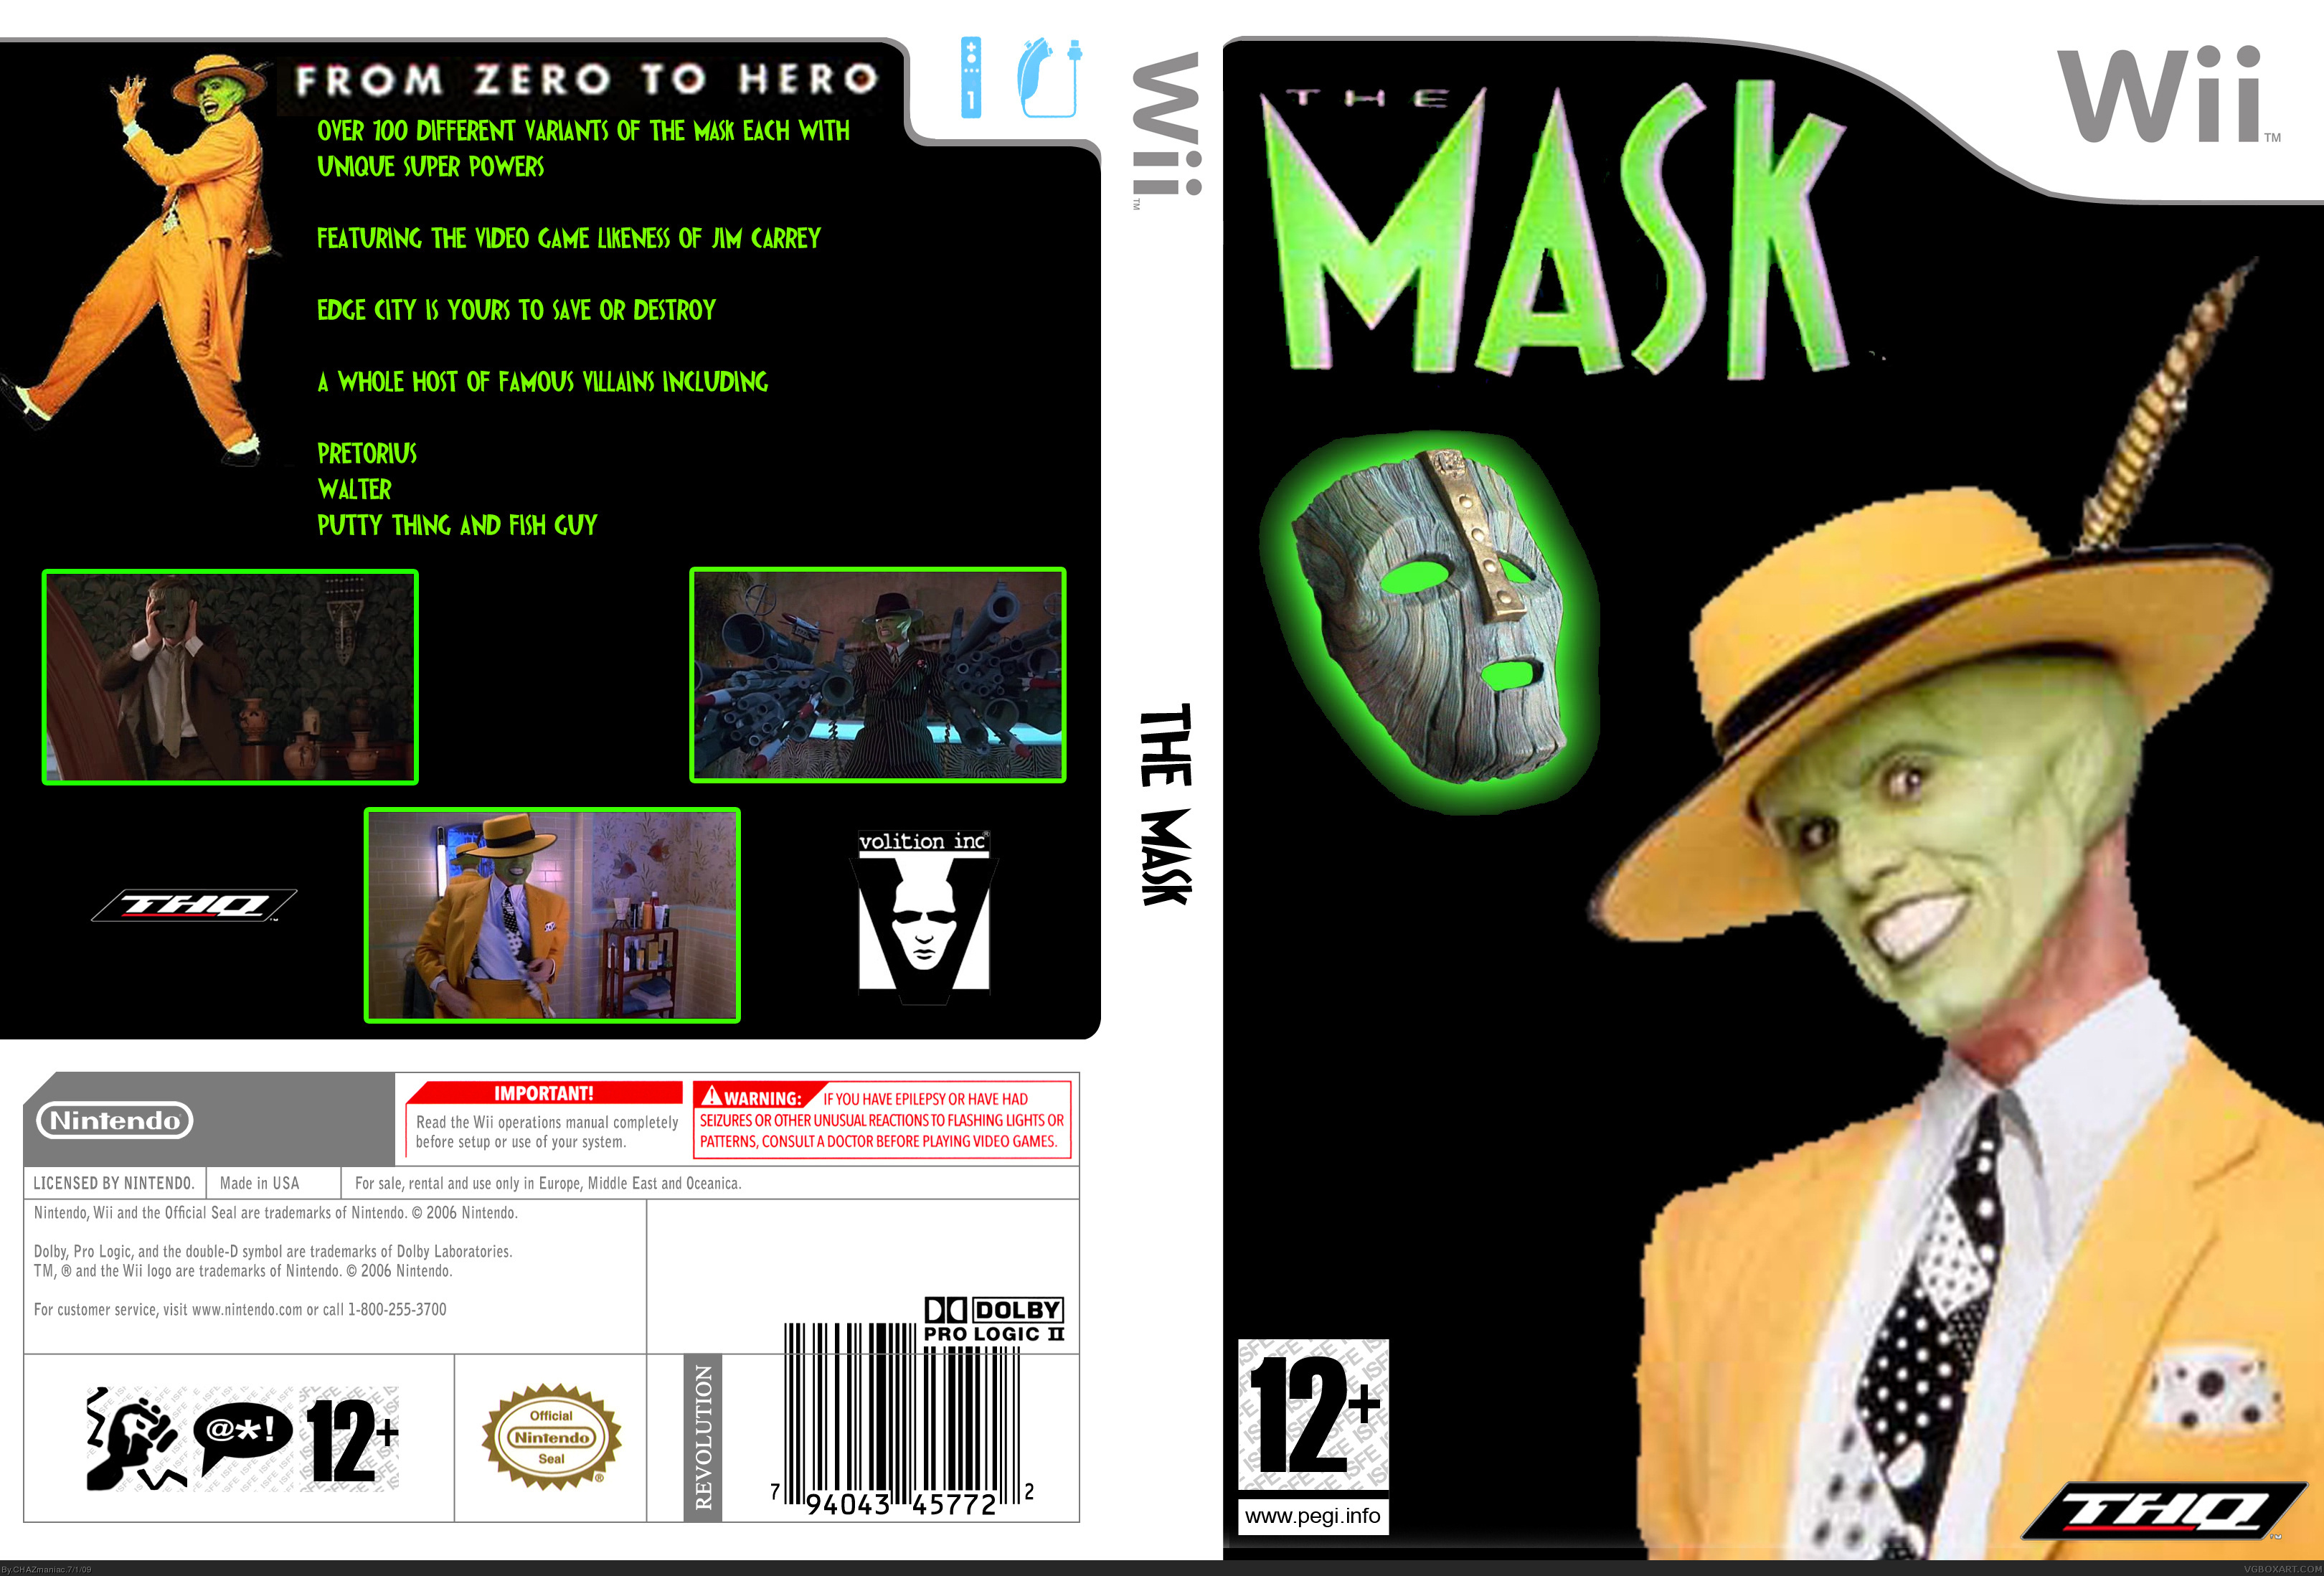 The Mask box cover